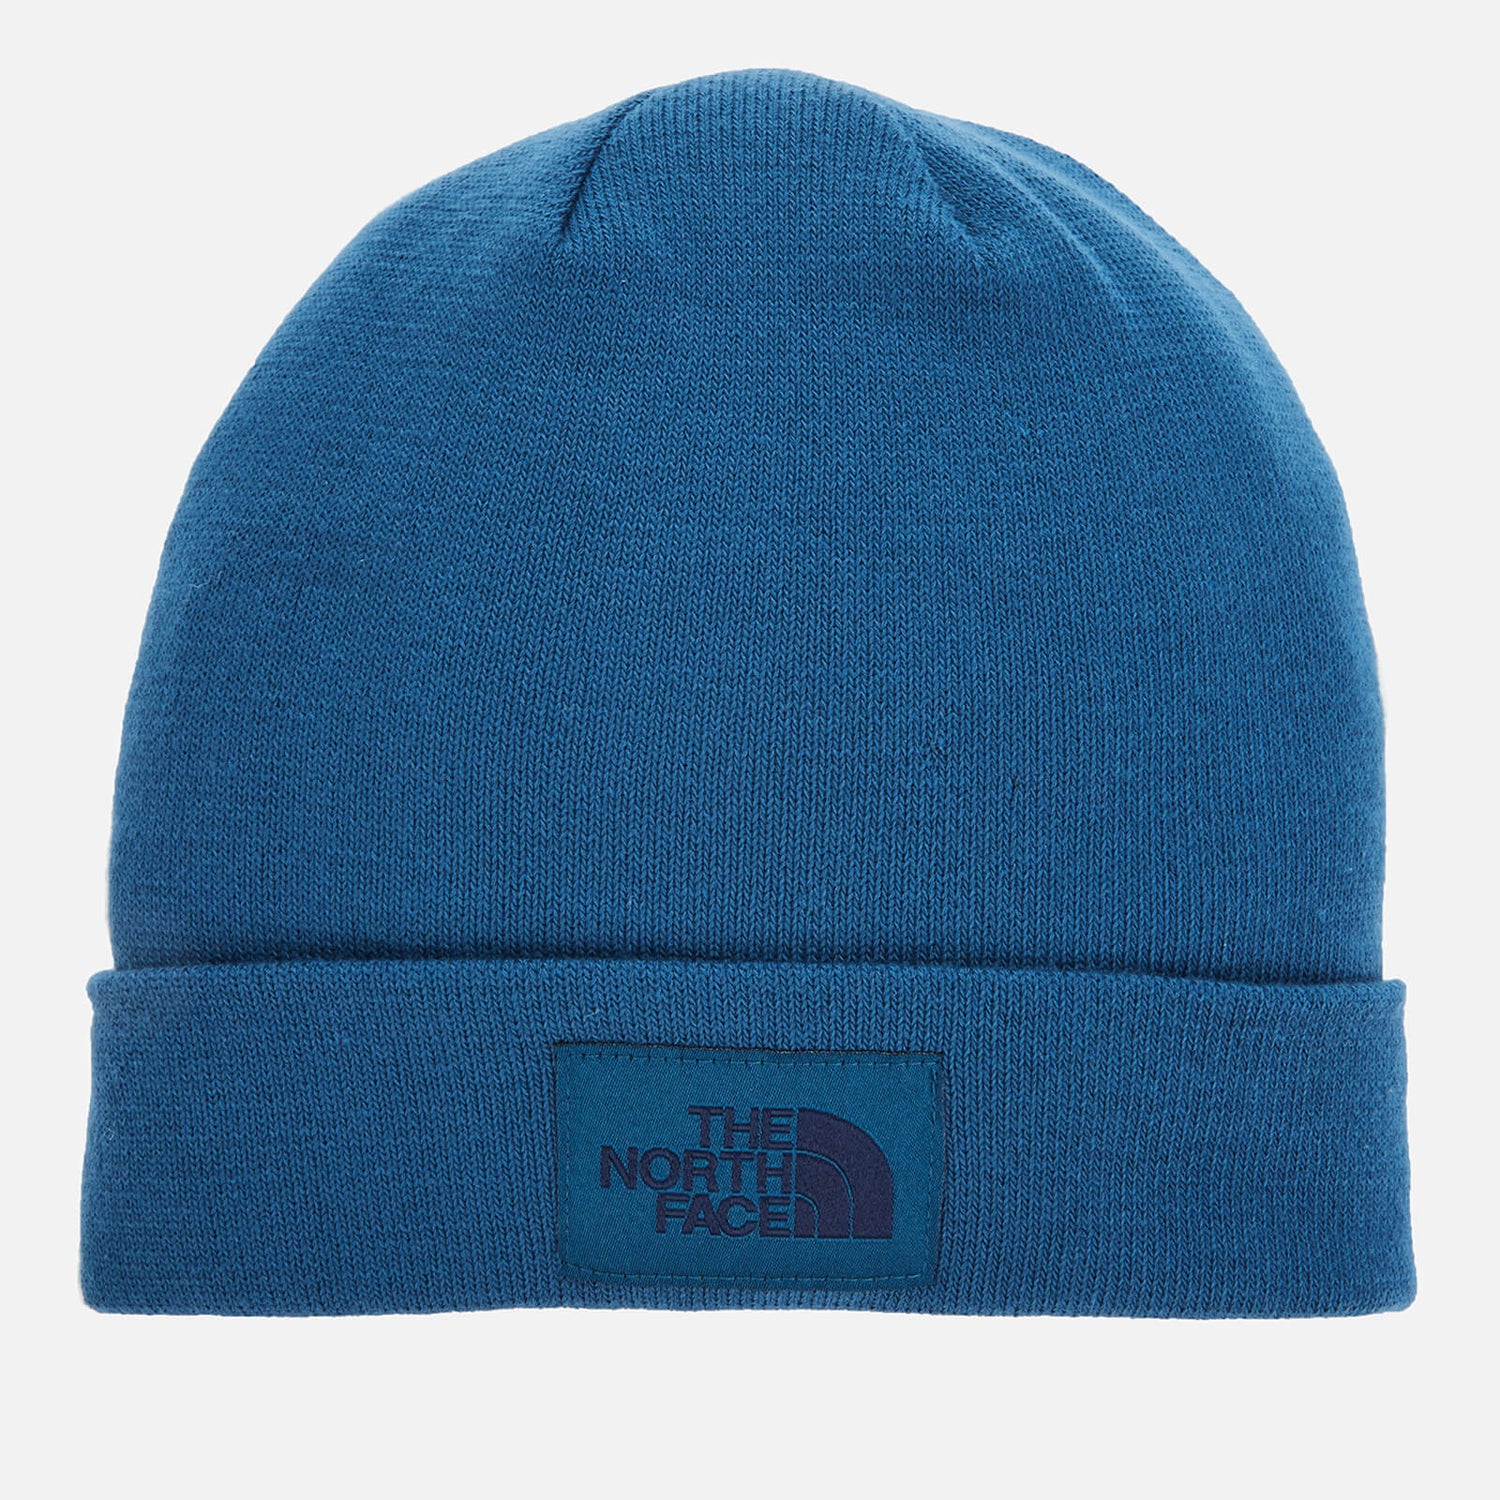 The North Face Dock Worker Recycled Beanie in Blue Womens Accessories Hats 